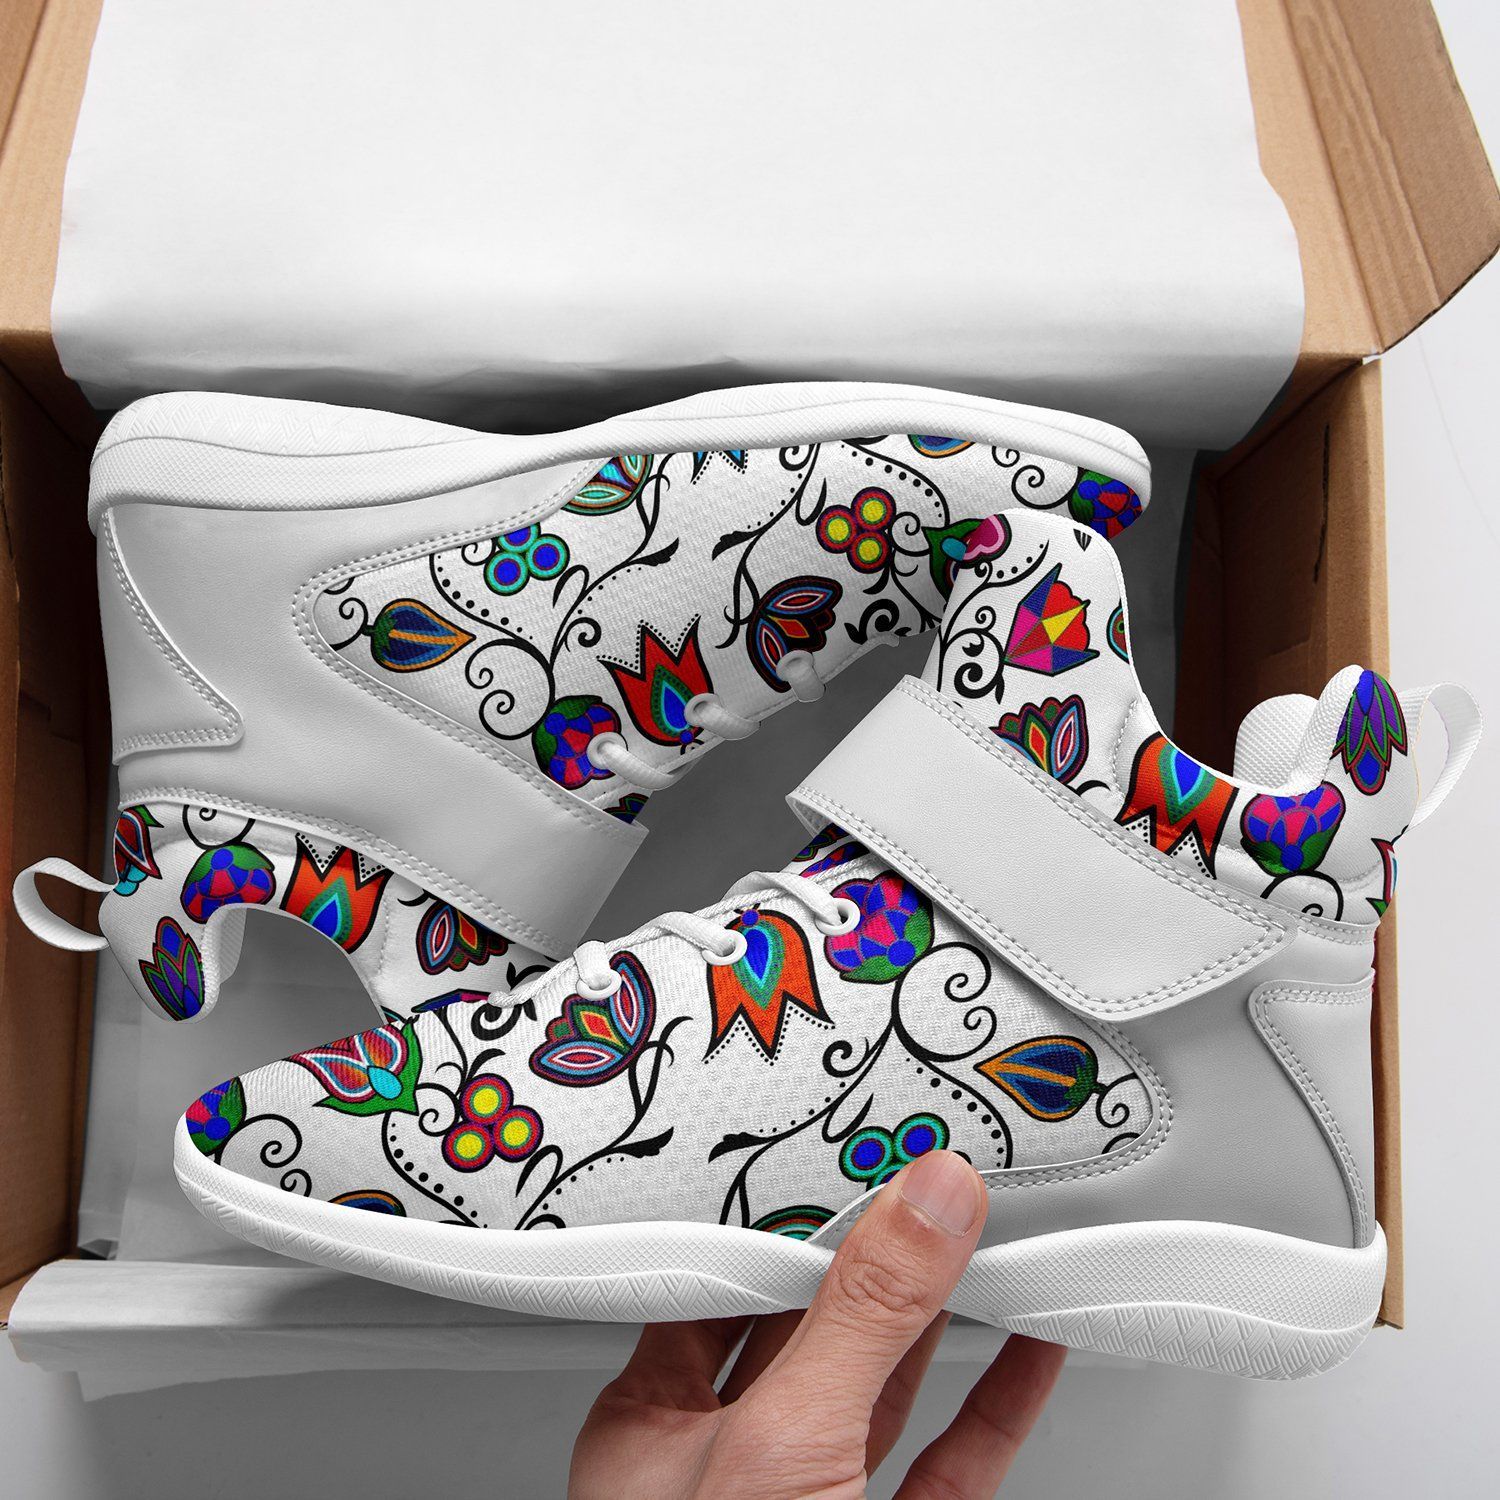 Indigenous Paisley White Ipottaa Basketball / Sport High Top Shoes - White Sole 49 Dzine 